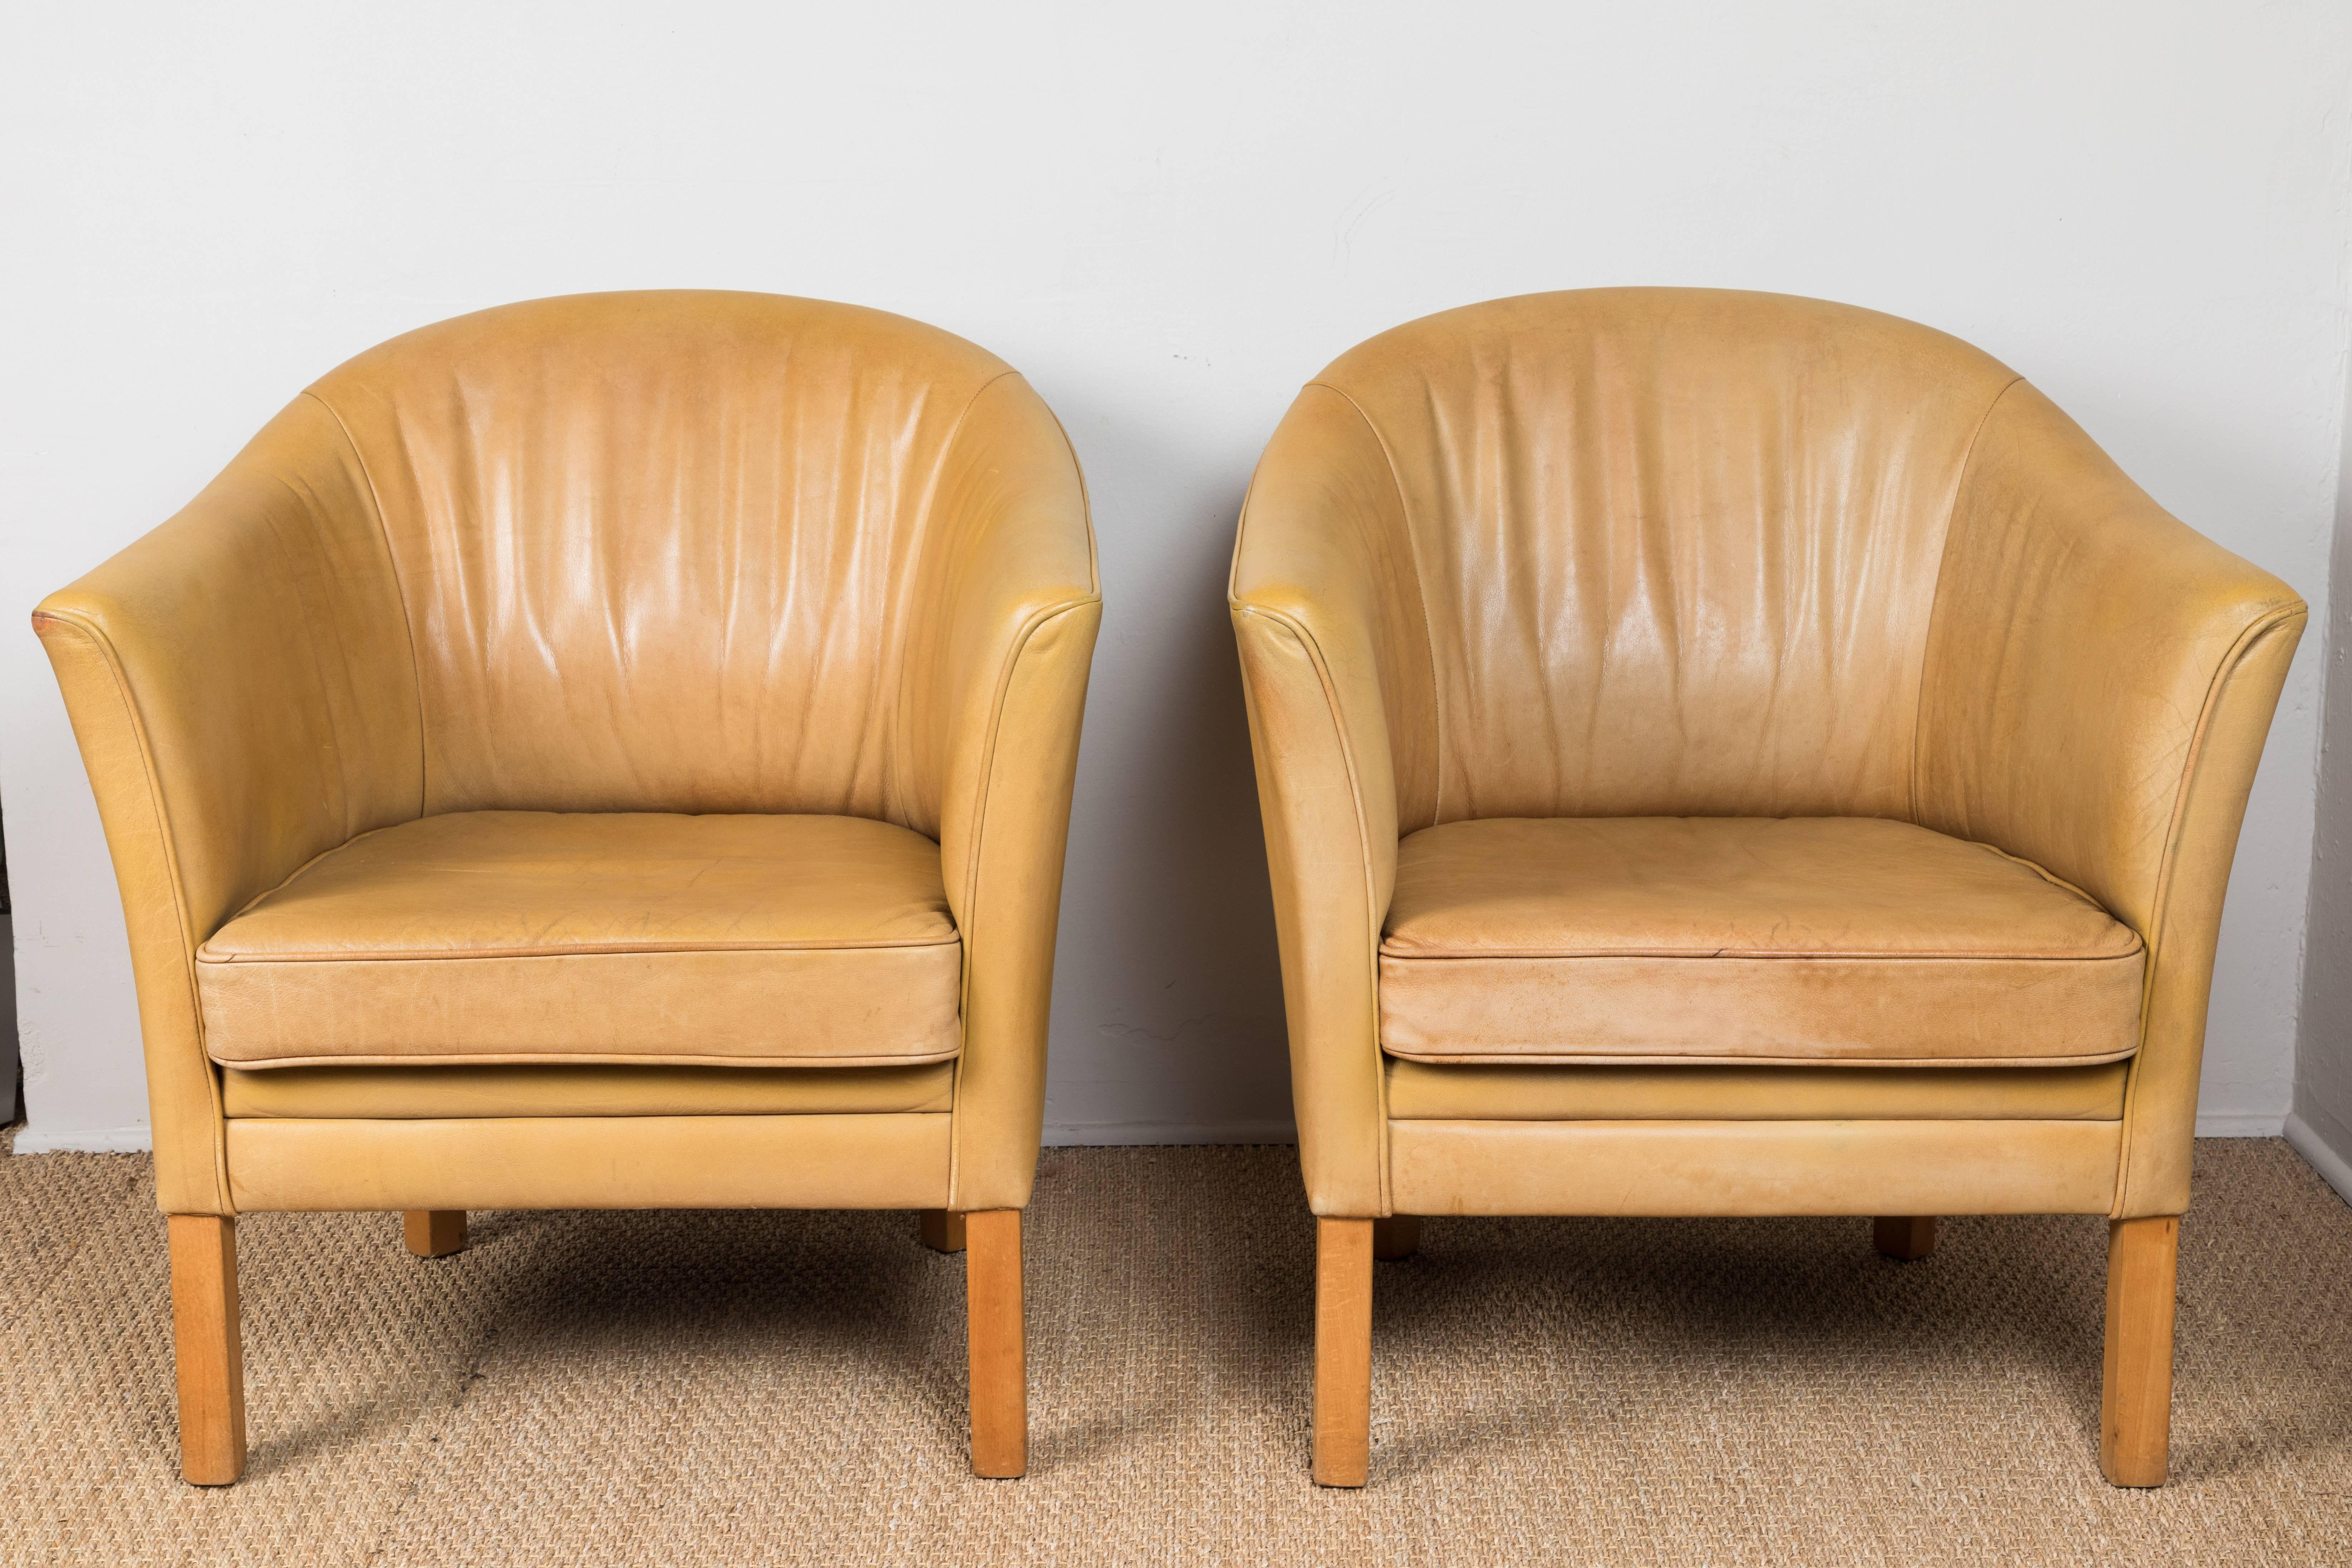 Slightly distressed, vintage honey colored leather chairs.  Sold individually. Offered at .